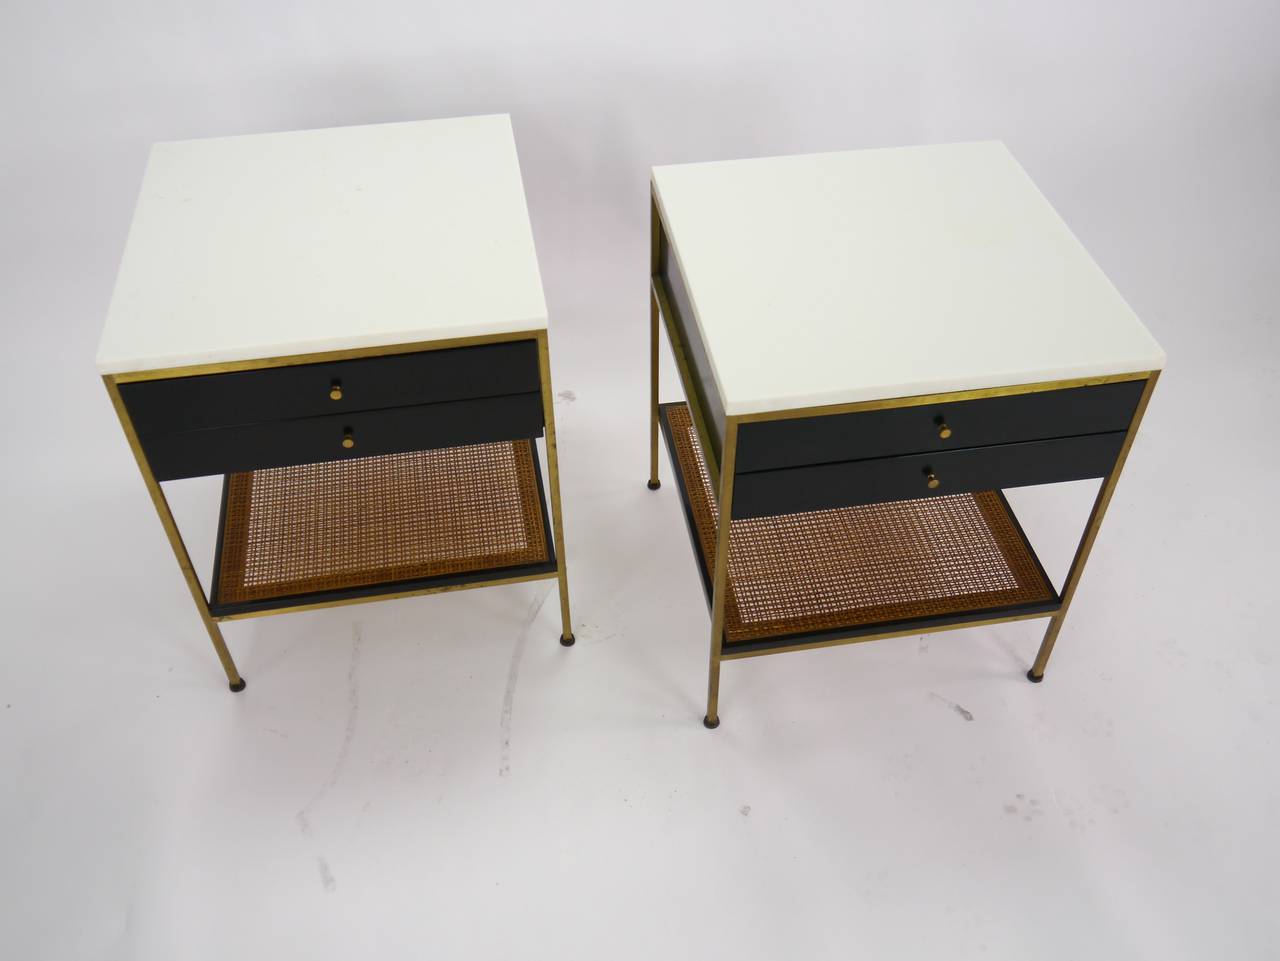 Pair of Paul McCobb Irwin Collection Nightstands with Vitrolite Tops 1